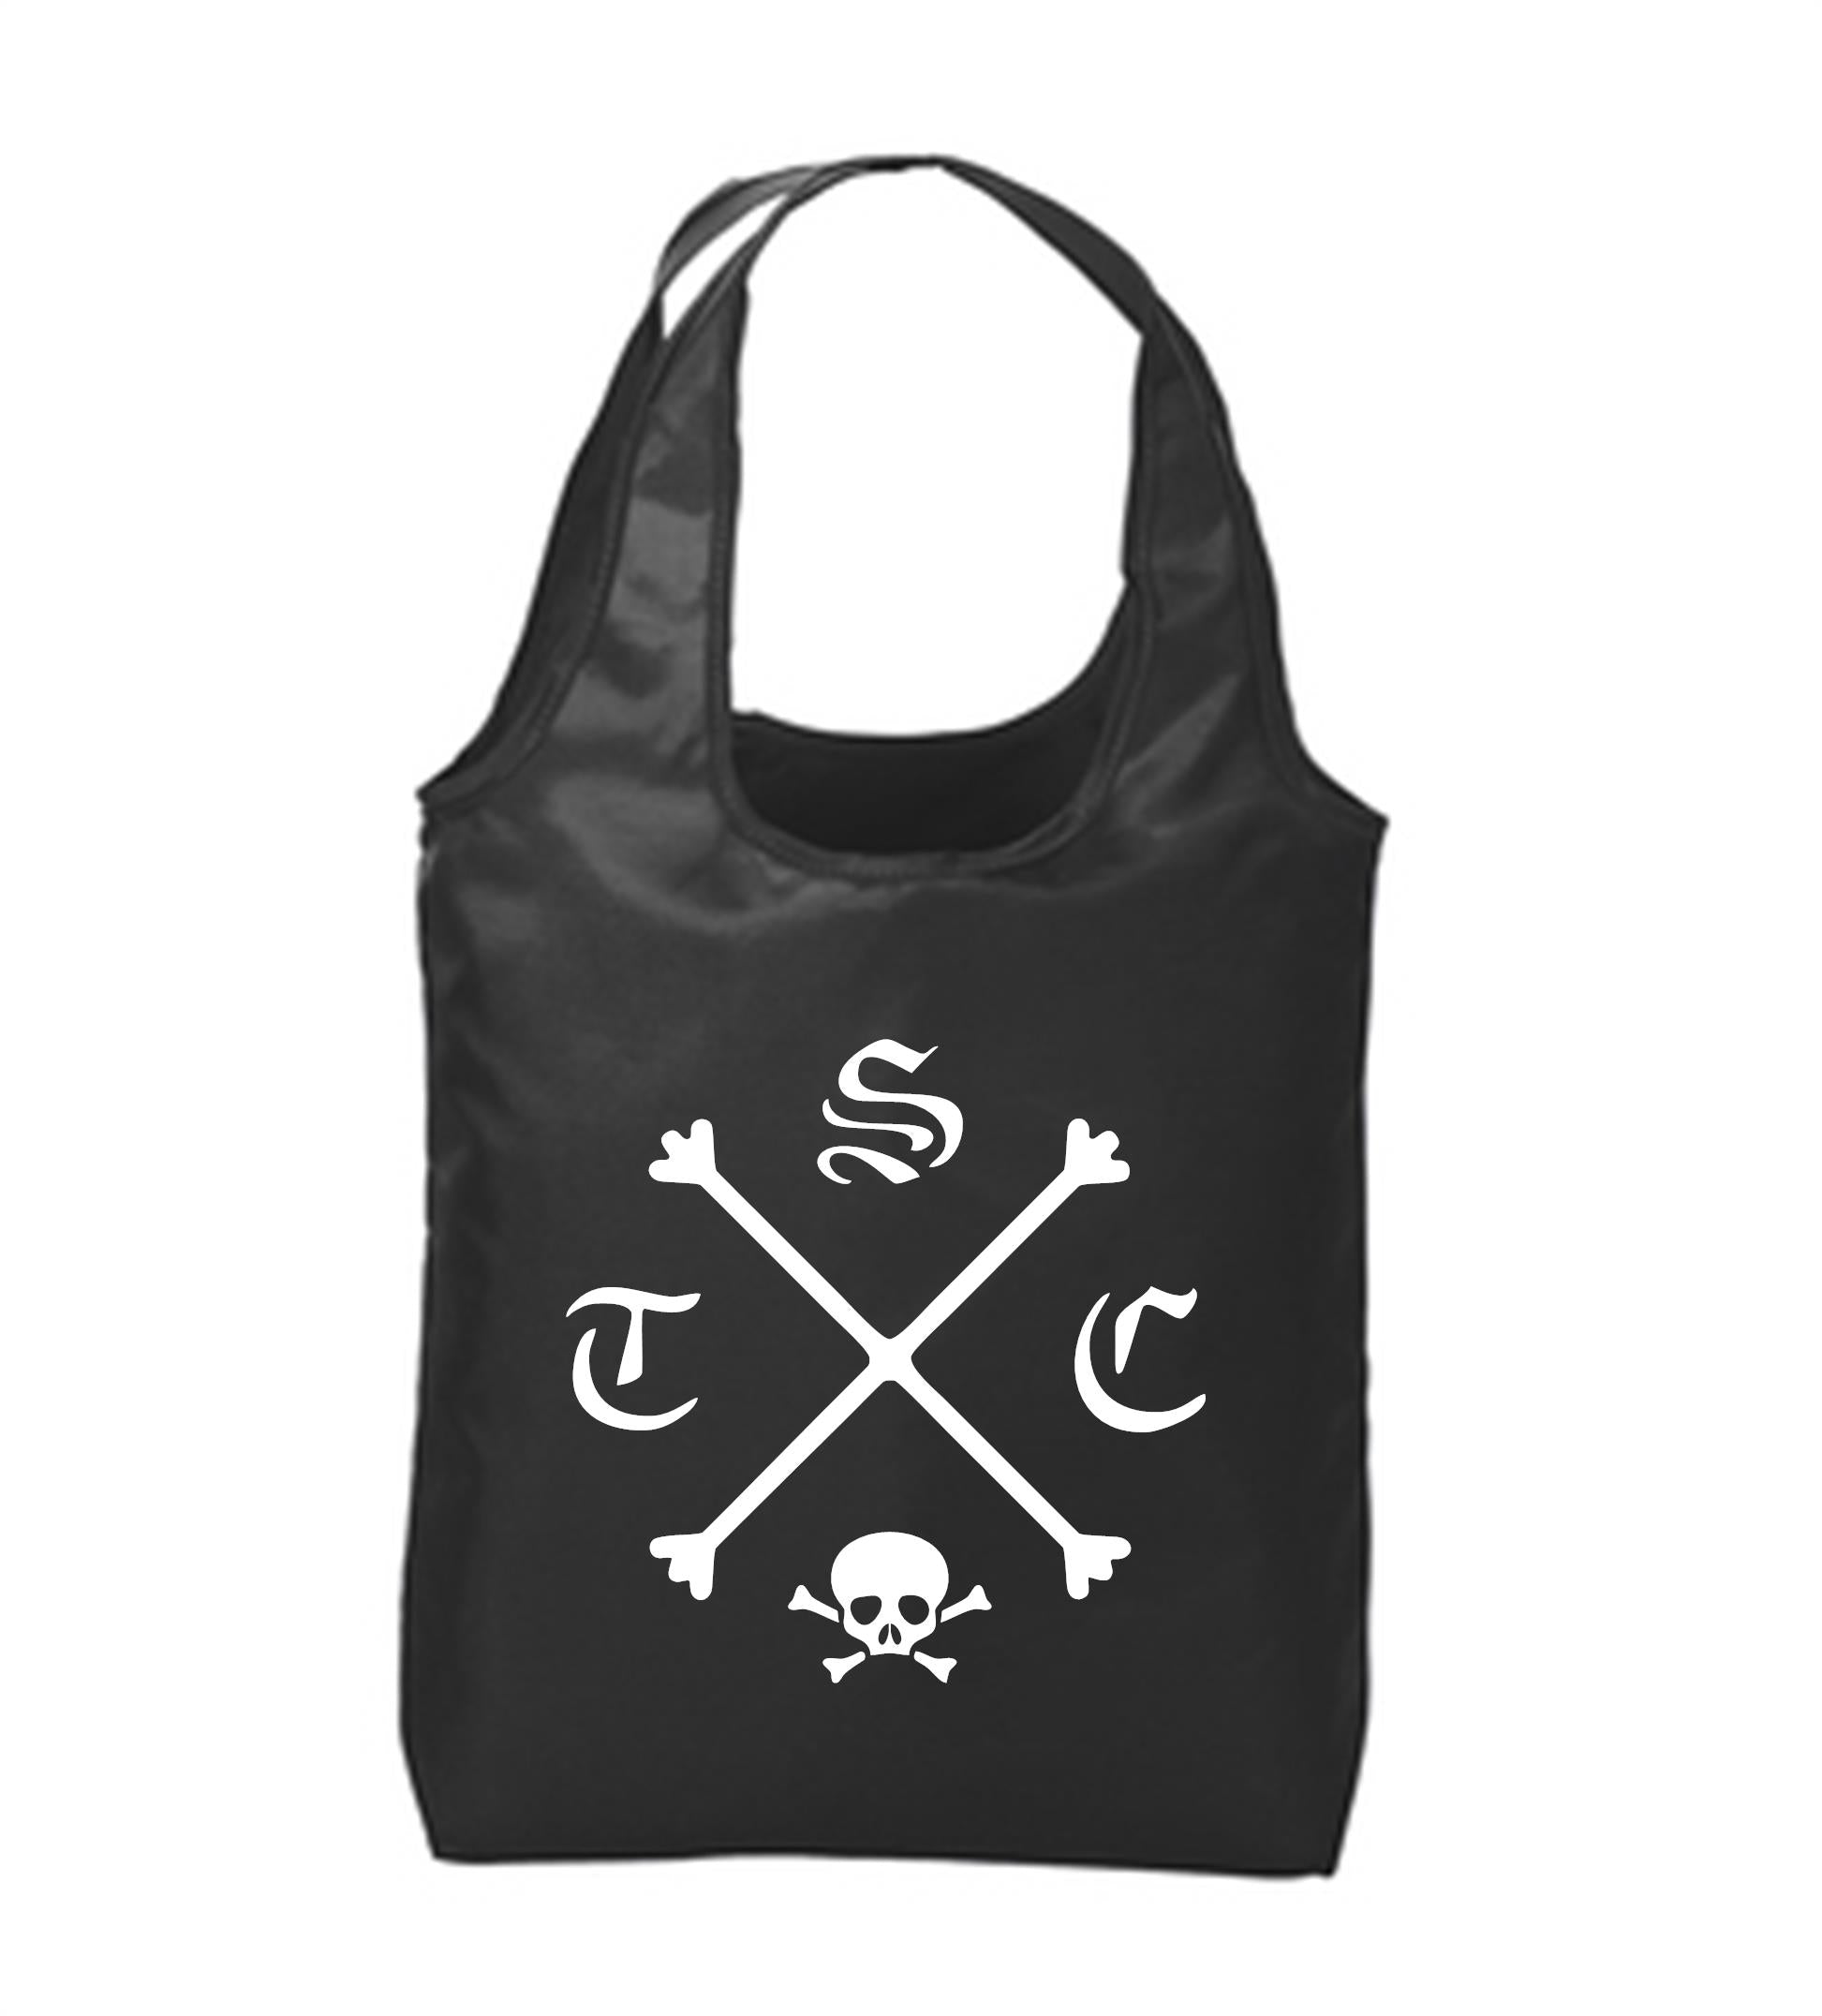 STC Shopping Tote